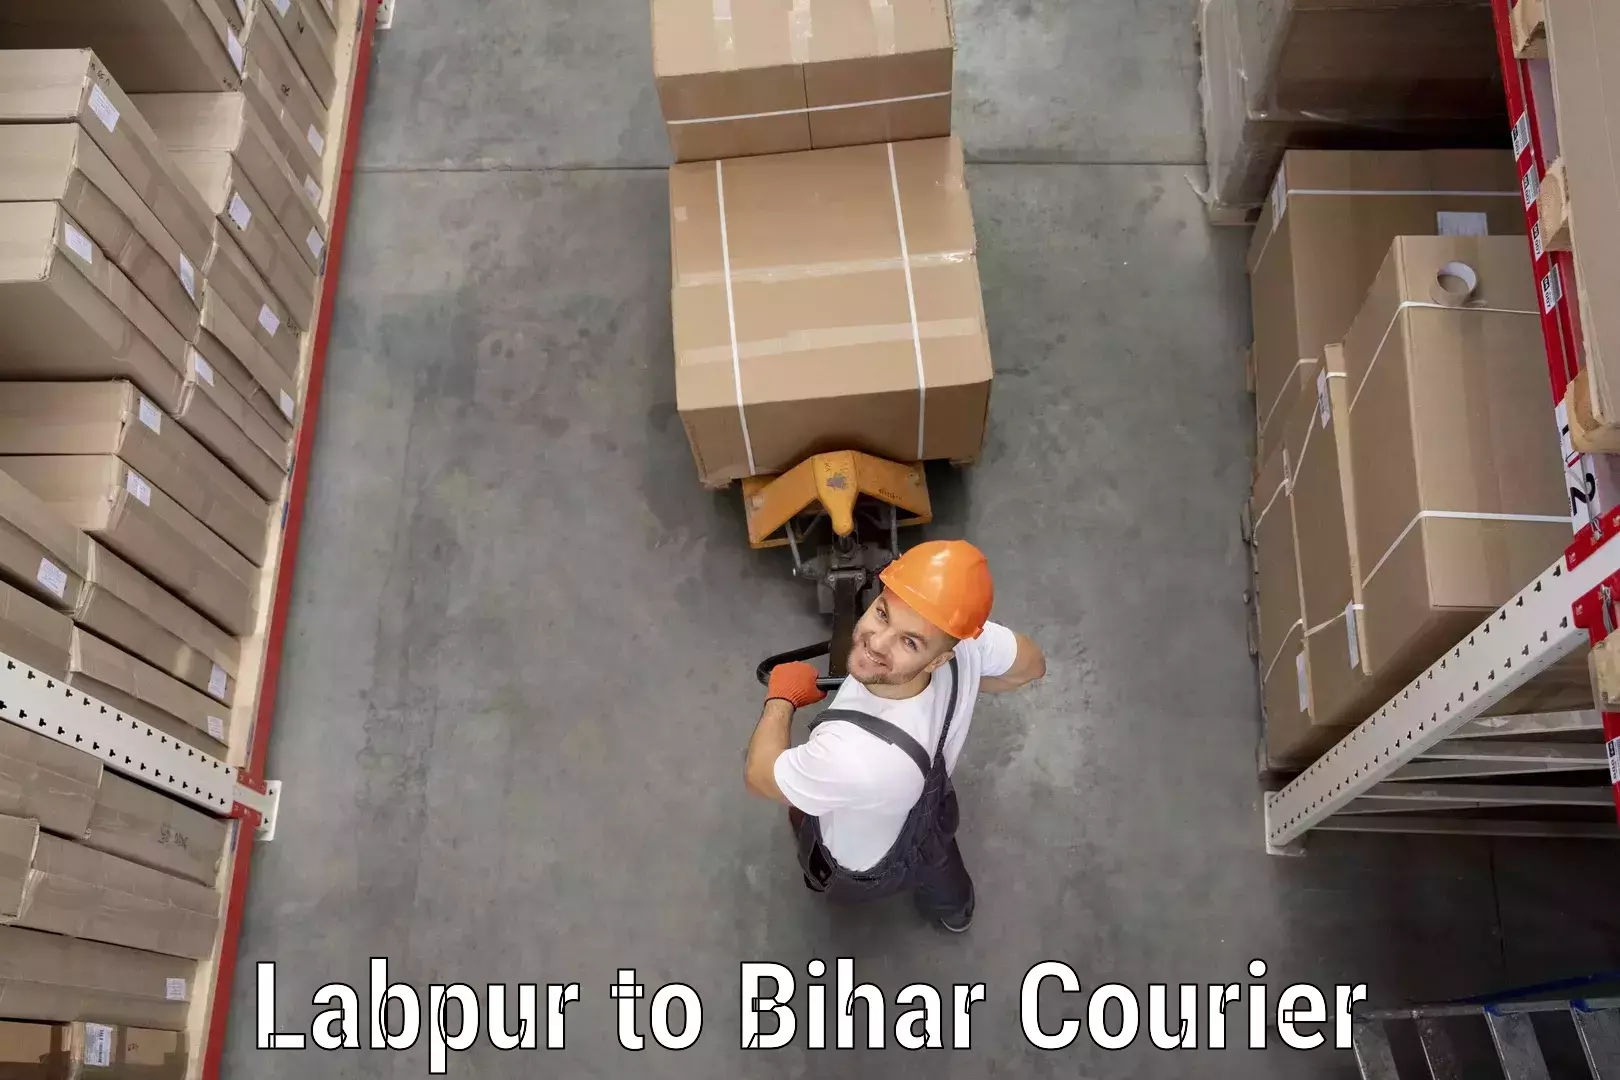 On-call courier service Labpur to Bihta